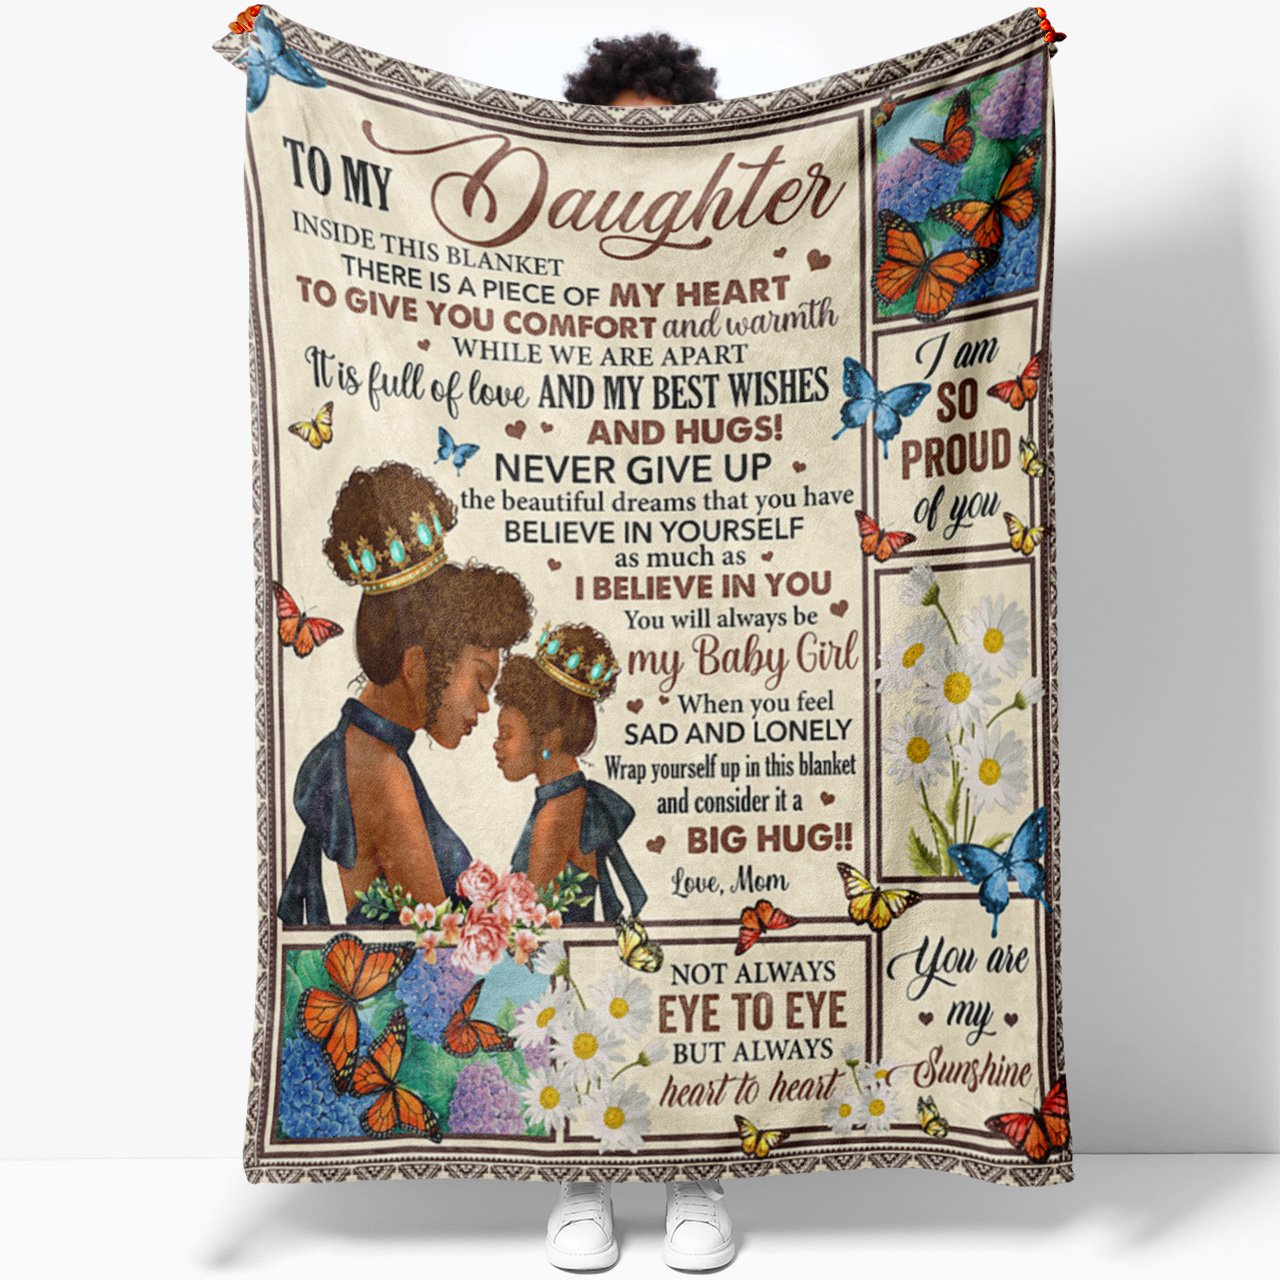 Blanket Gift for Black Daughter, I'm so Proud of You, You're My Sunshine Blanket for Daughter, Presents For Special Gifts For Grown Up Daughters